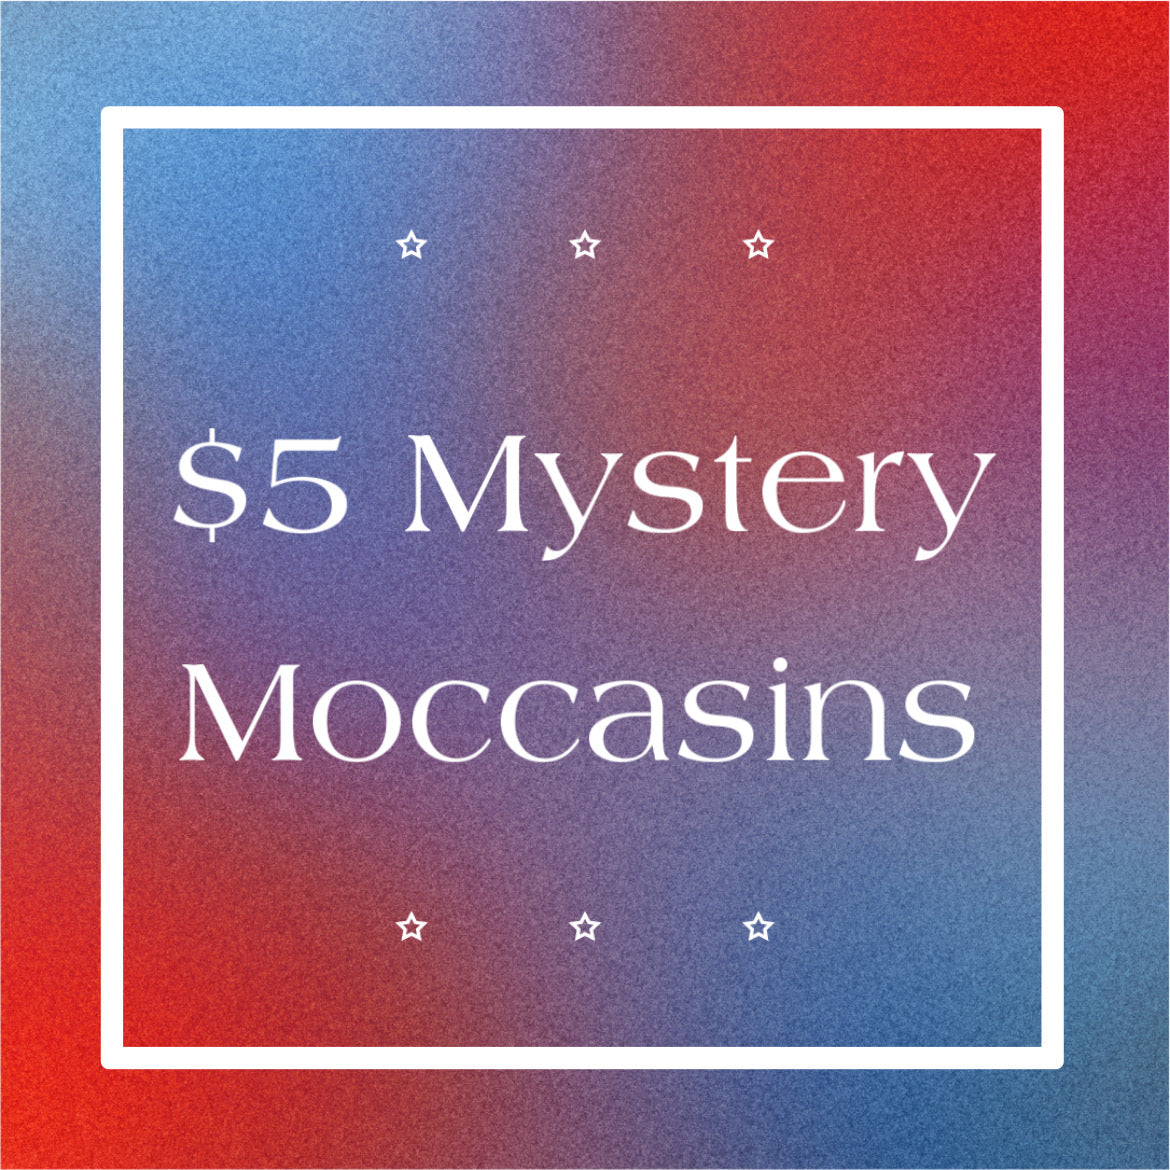 $5 Mystery Leather Moccasins